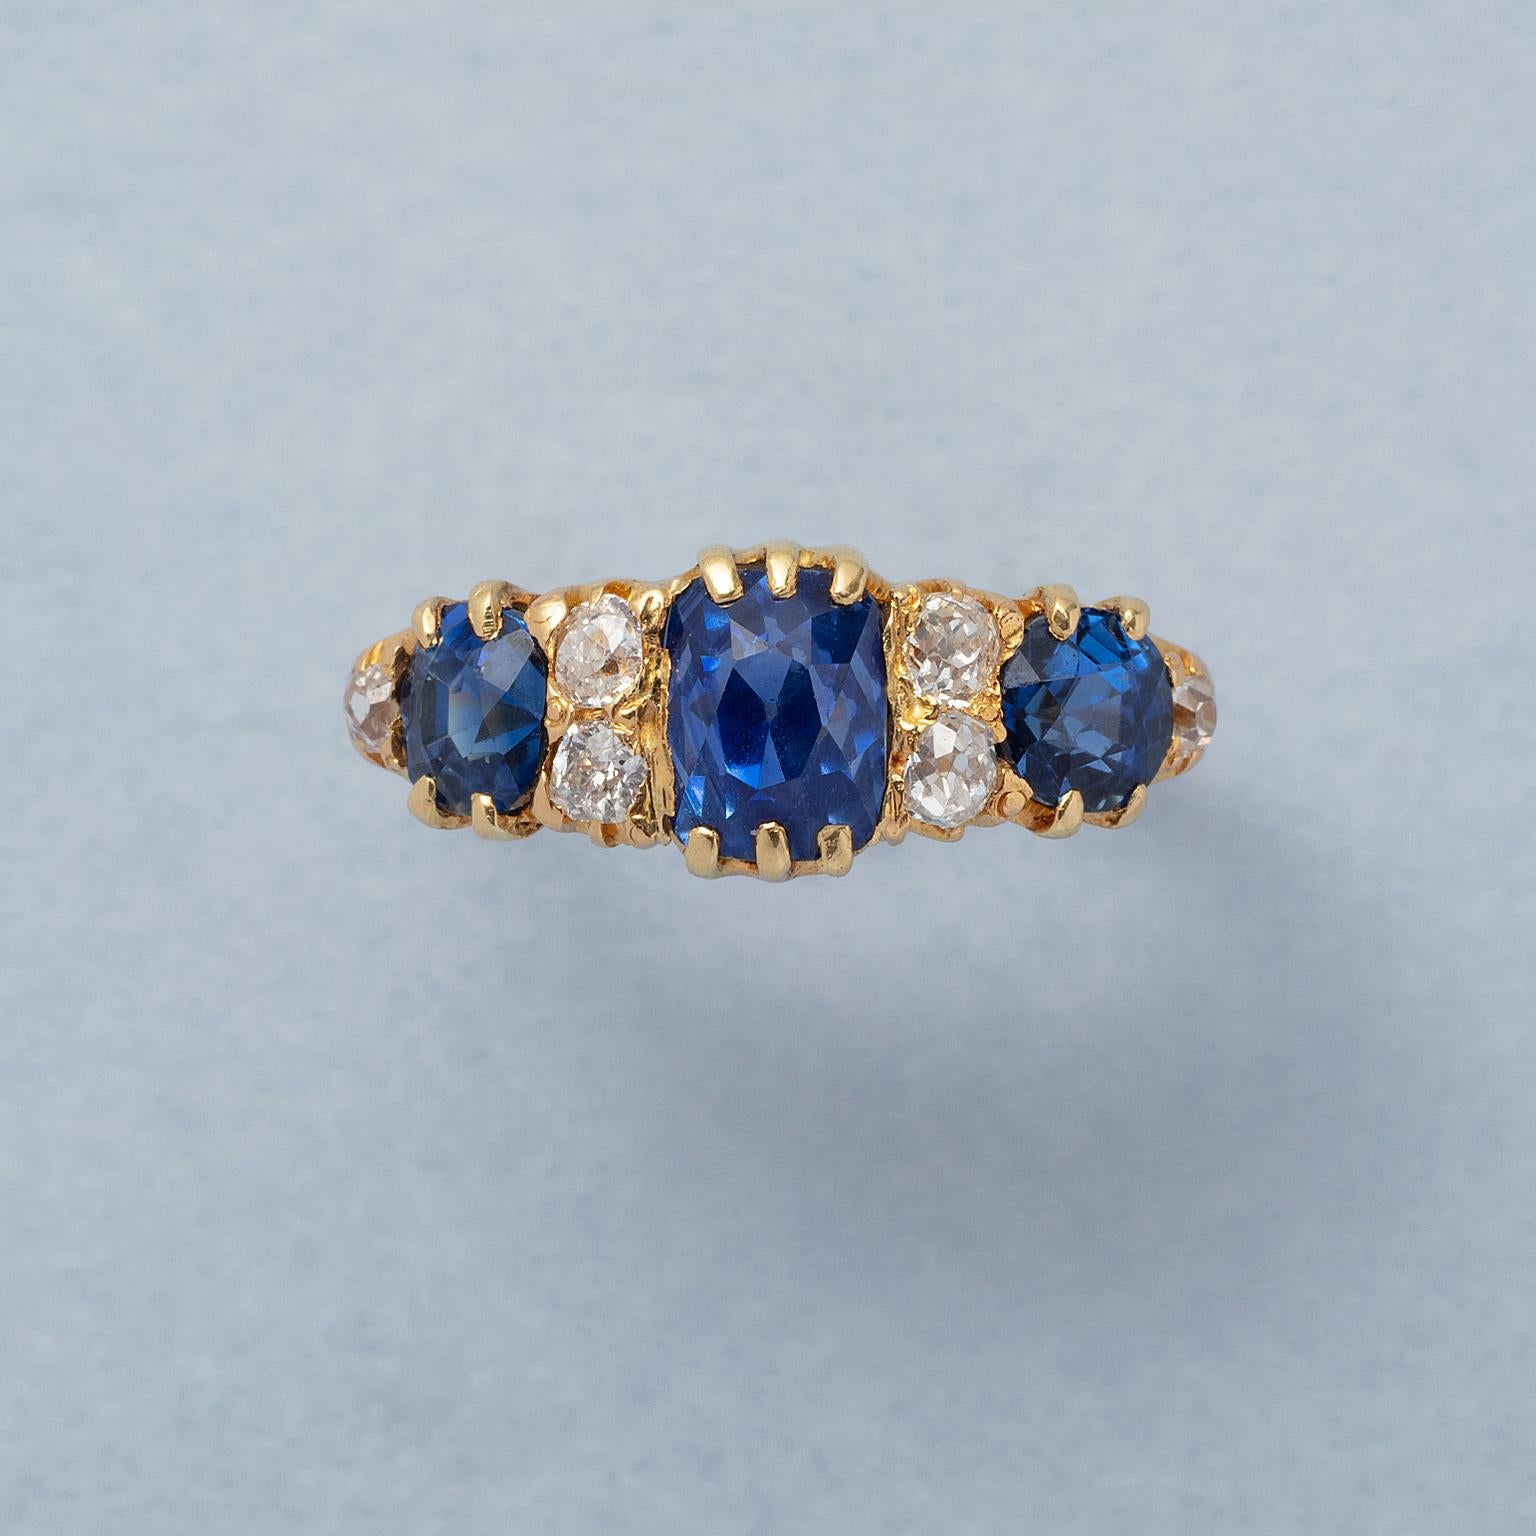 An 18 carat yellow gold ring with three royal blue natural unheated sapphires each with two cushio ncut diamonds in between; a total of 6 cushion cut diamonds (app. 0.42 ct). In the center an cushion cut sapphire with a round sapphire on one side